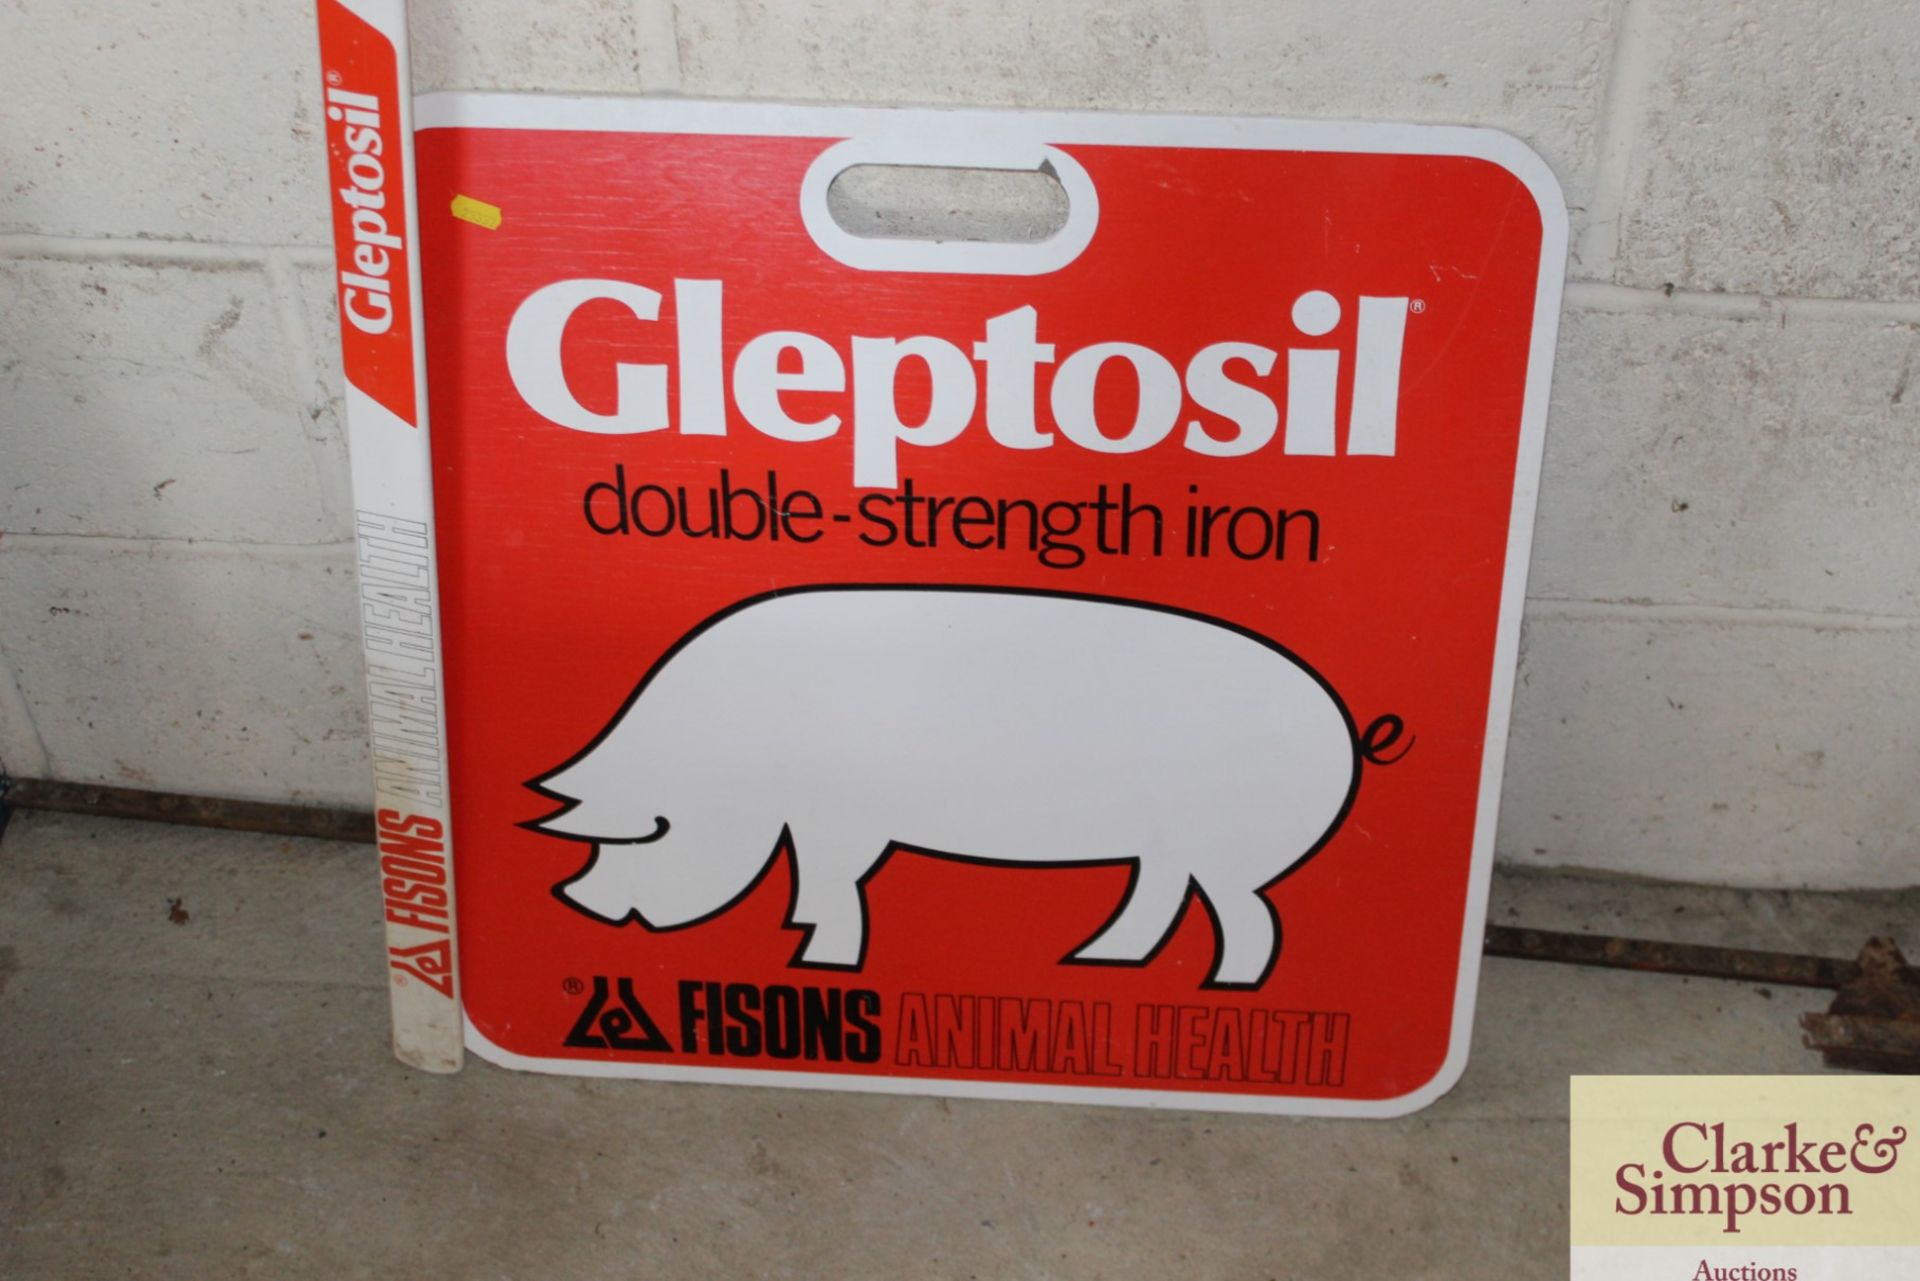 Fisons Animal Health pig showing stick and board. - Image 2 of 2